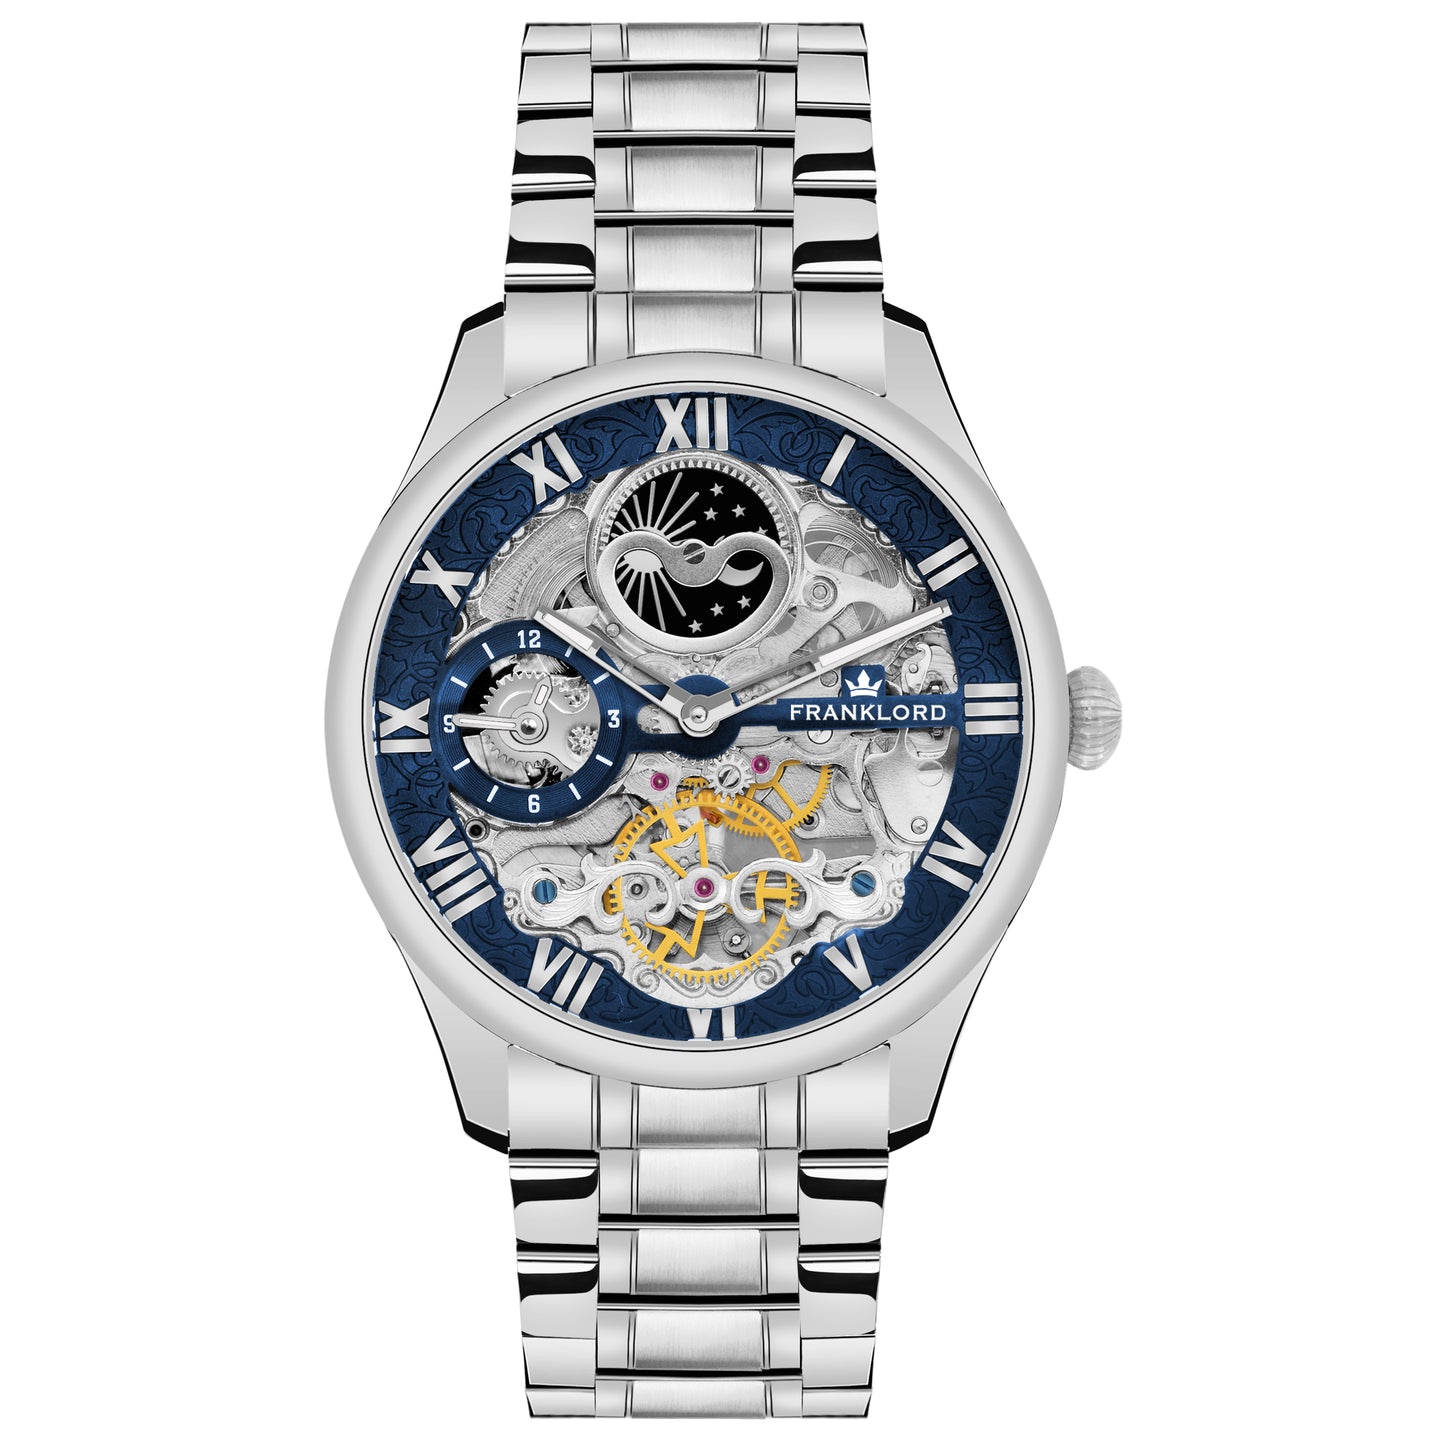 ALEXANDER -  Silver- Imperial Legacy Self Winder Mechanical Series Analog Watch - For Men  F-115 STG 21